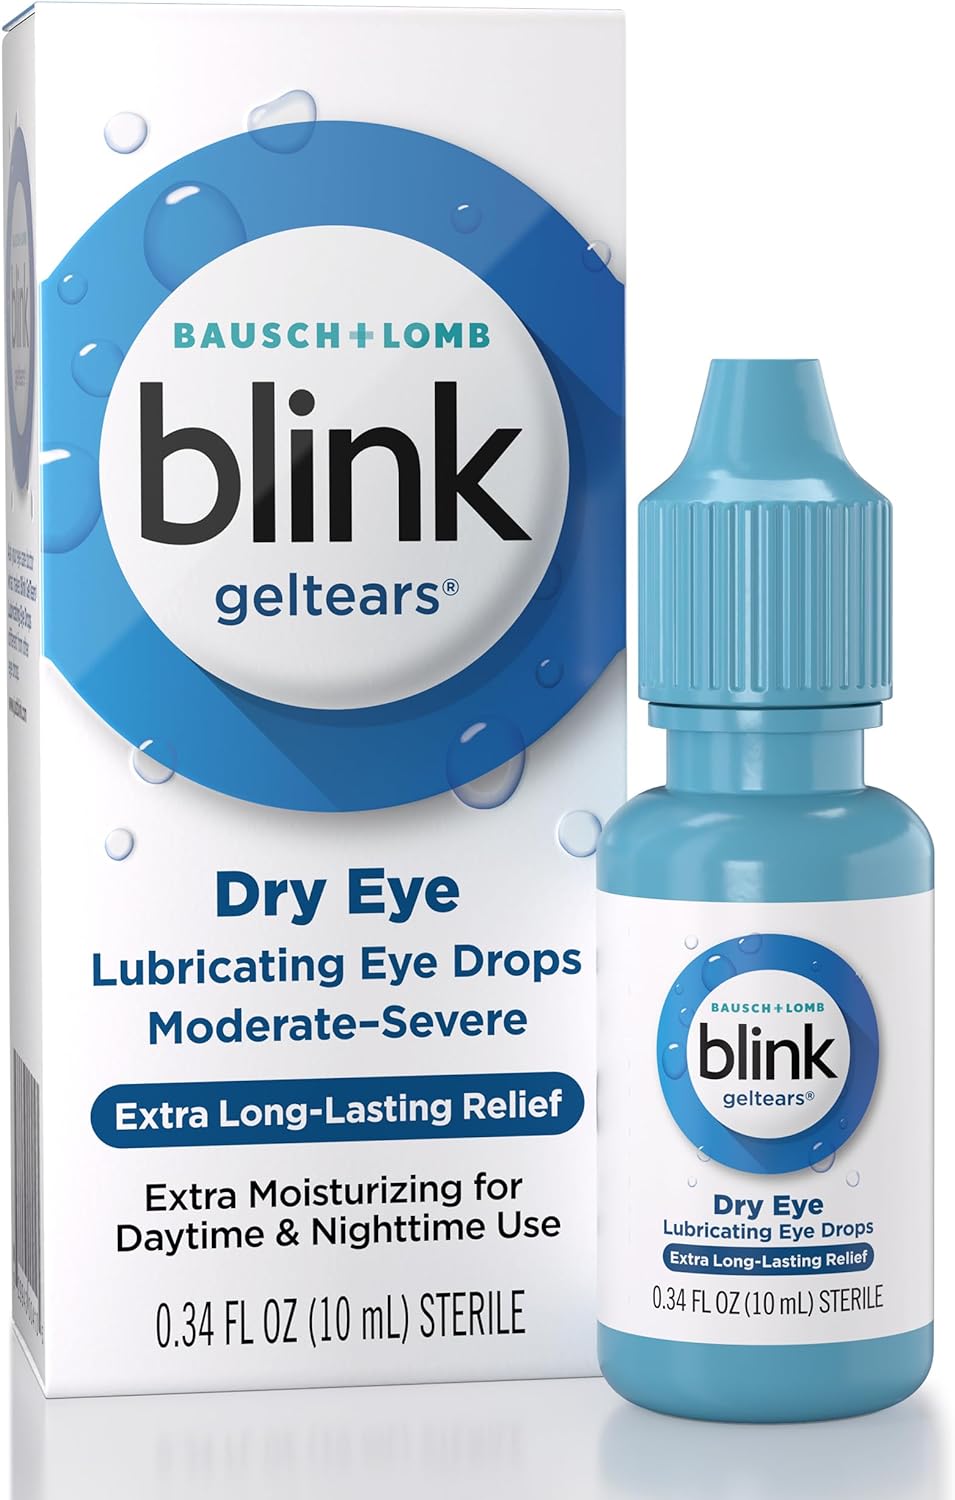 Blink GelTears Eye Drops for Dry Eyes, Gel Lubricating Eye Drops, Instantly Soothing, Moisturizing & Extra Long-Lasting Hydrating Eye Care for Moderate to Severe Dry Eye Symptom Relief, 0.34 fl oz